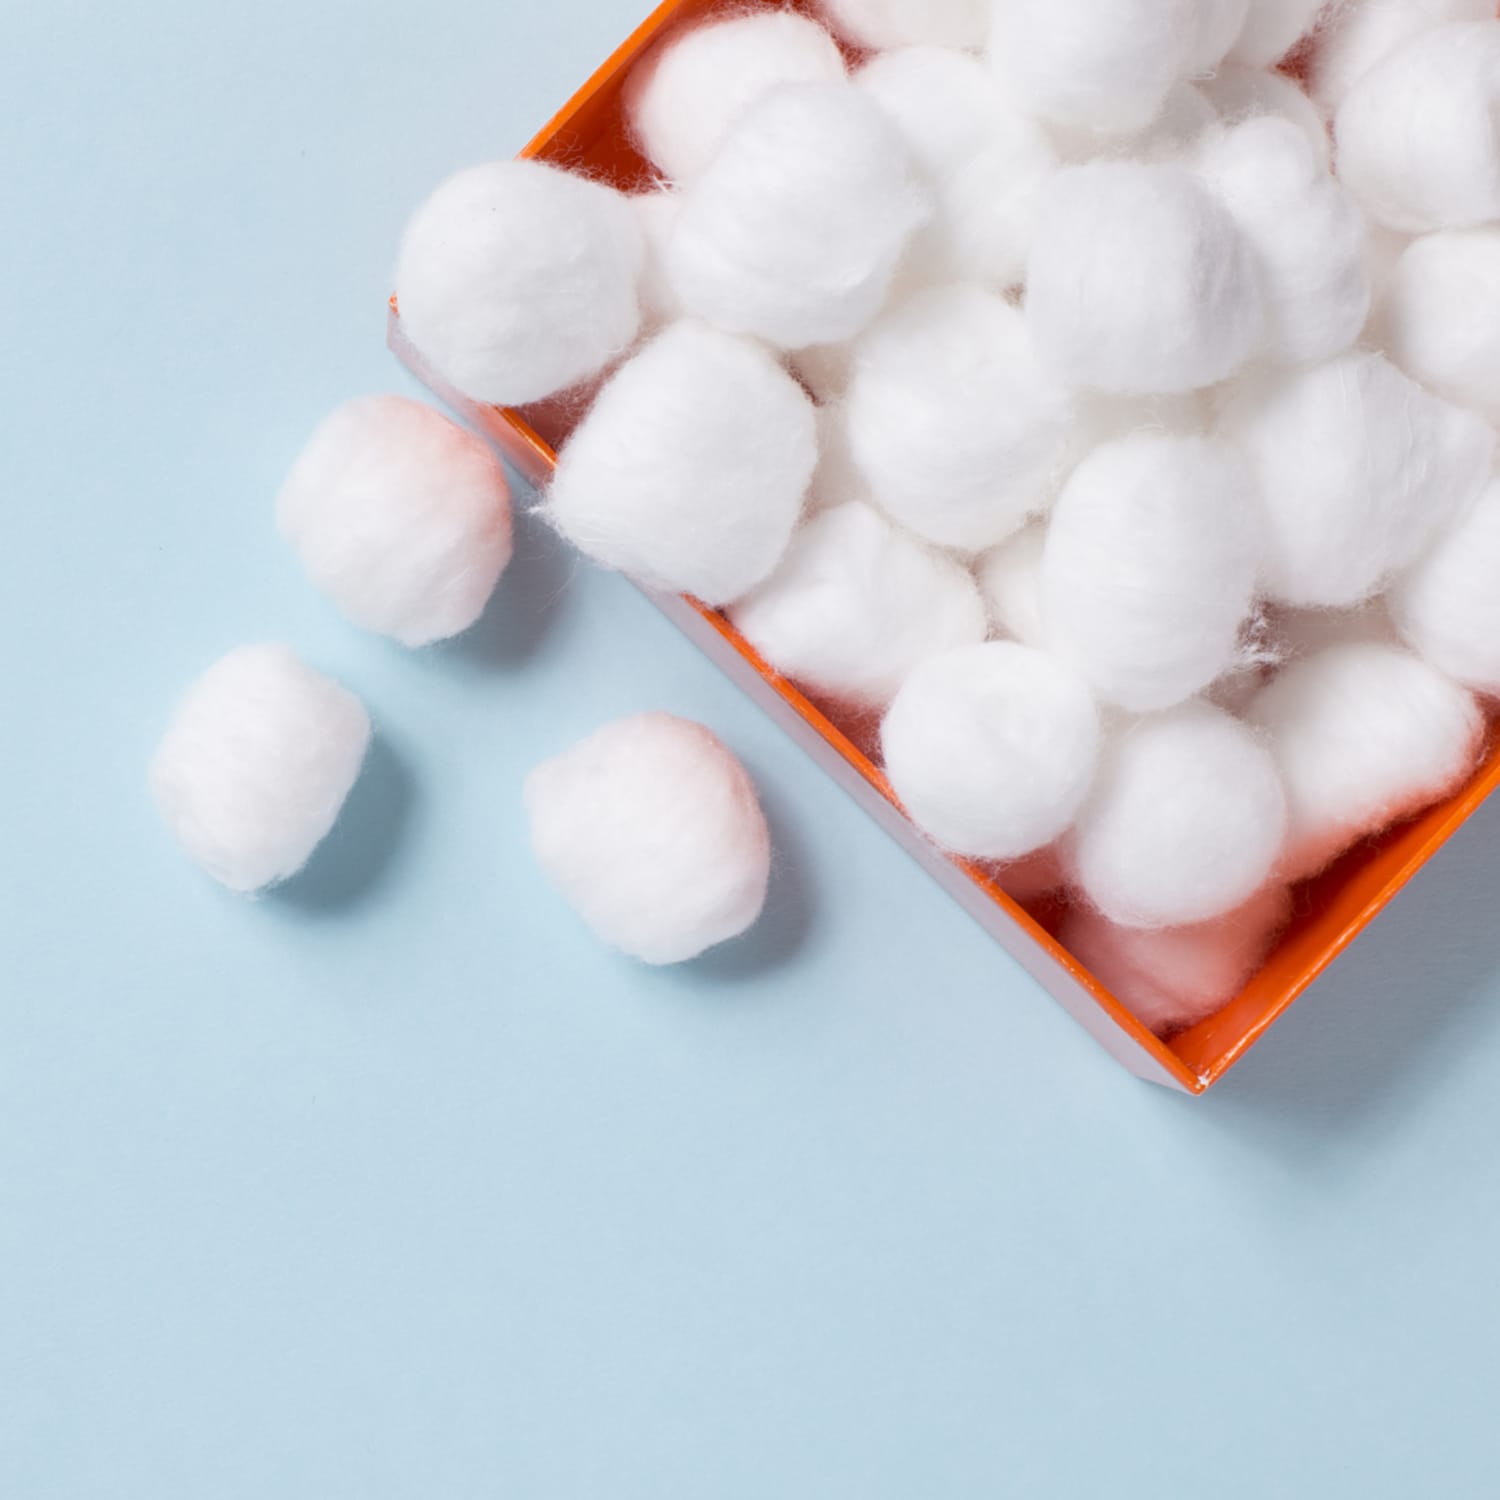 Why You Should Put a Cotton Ball in Your Trash Can